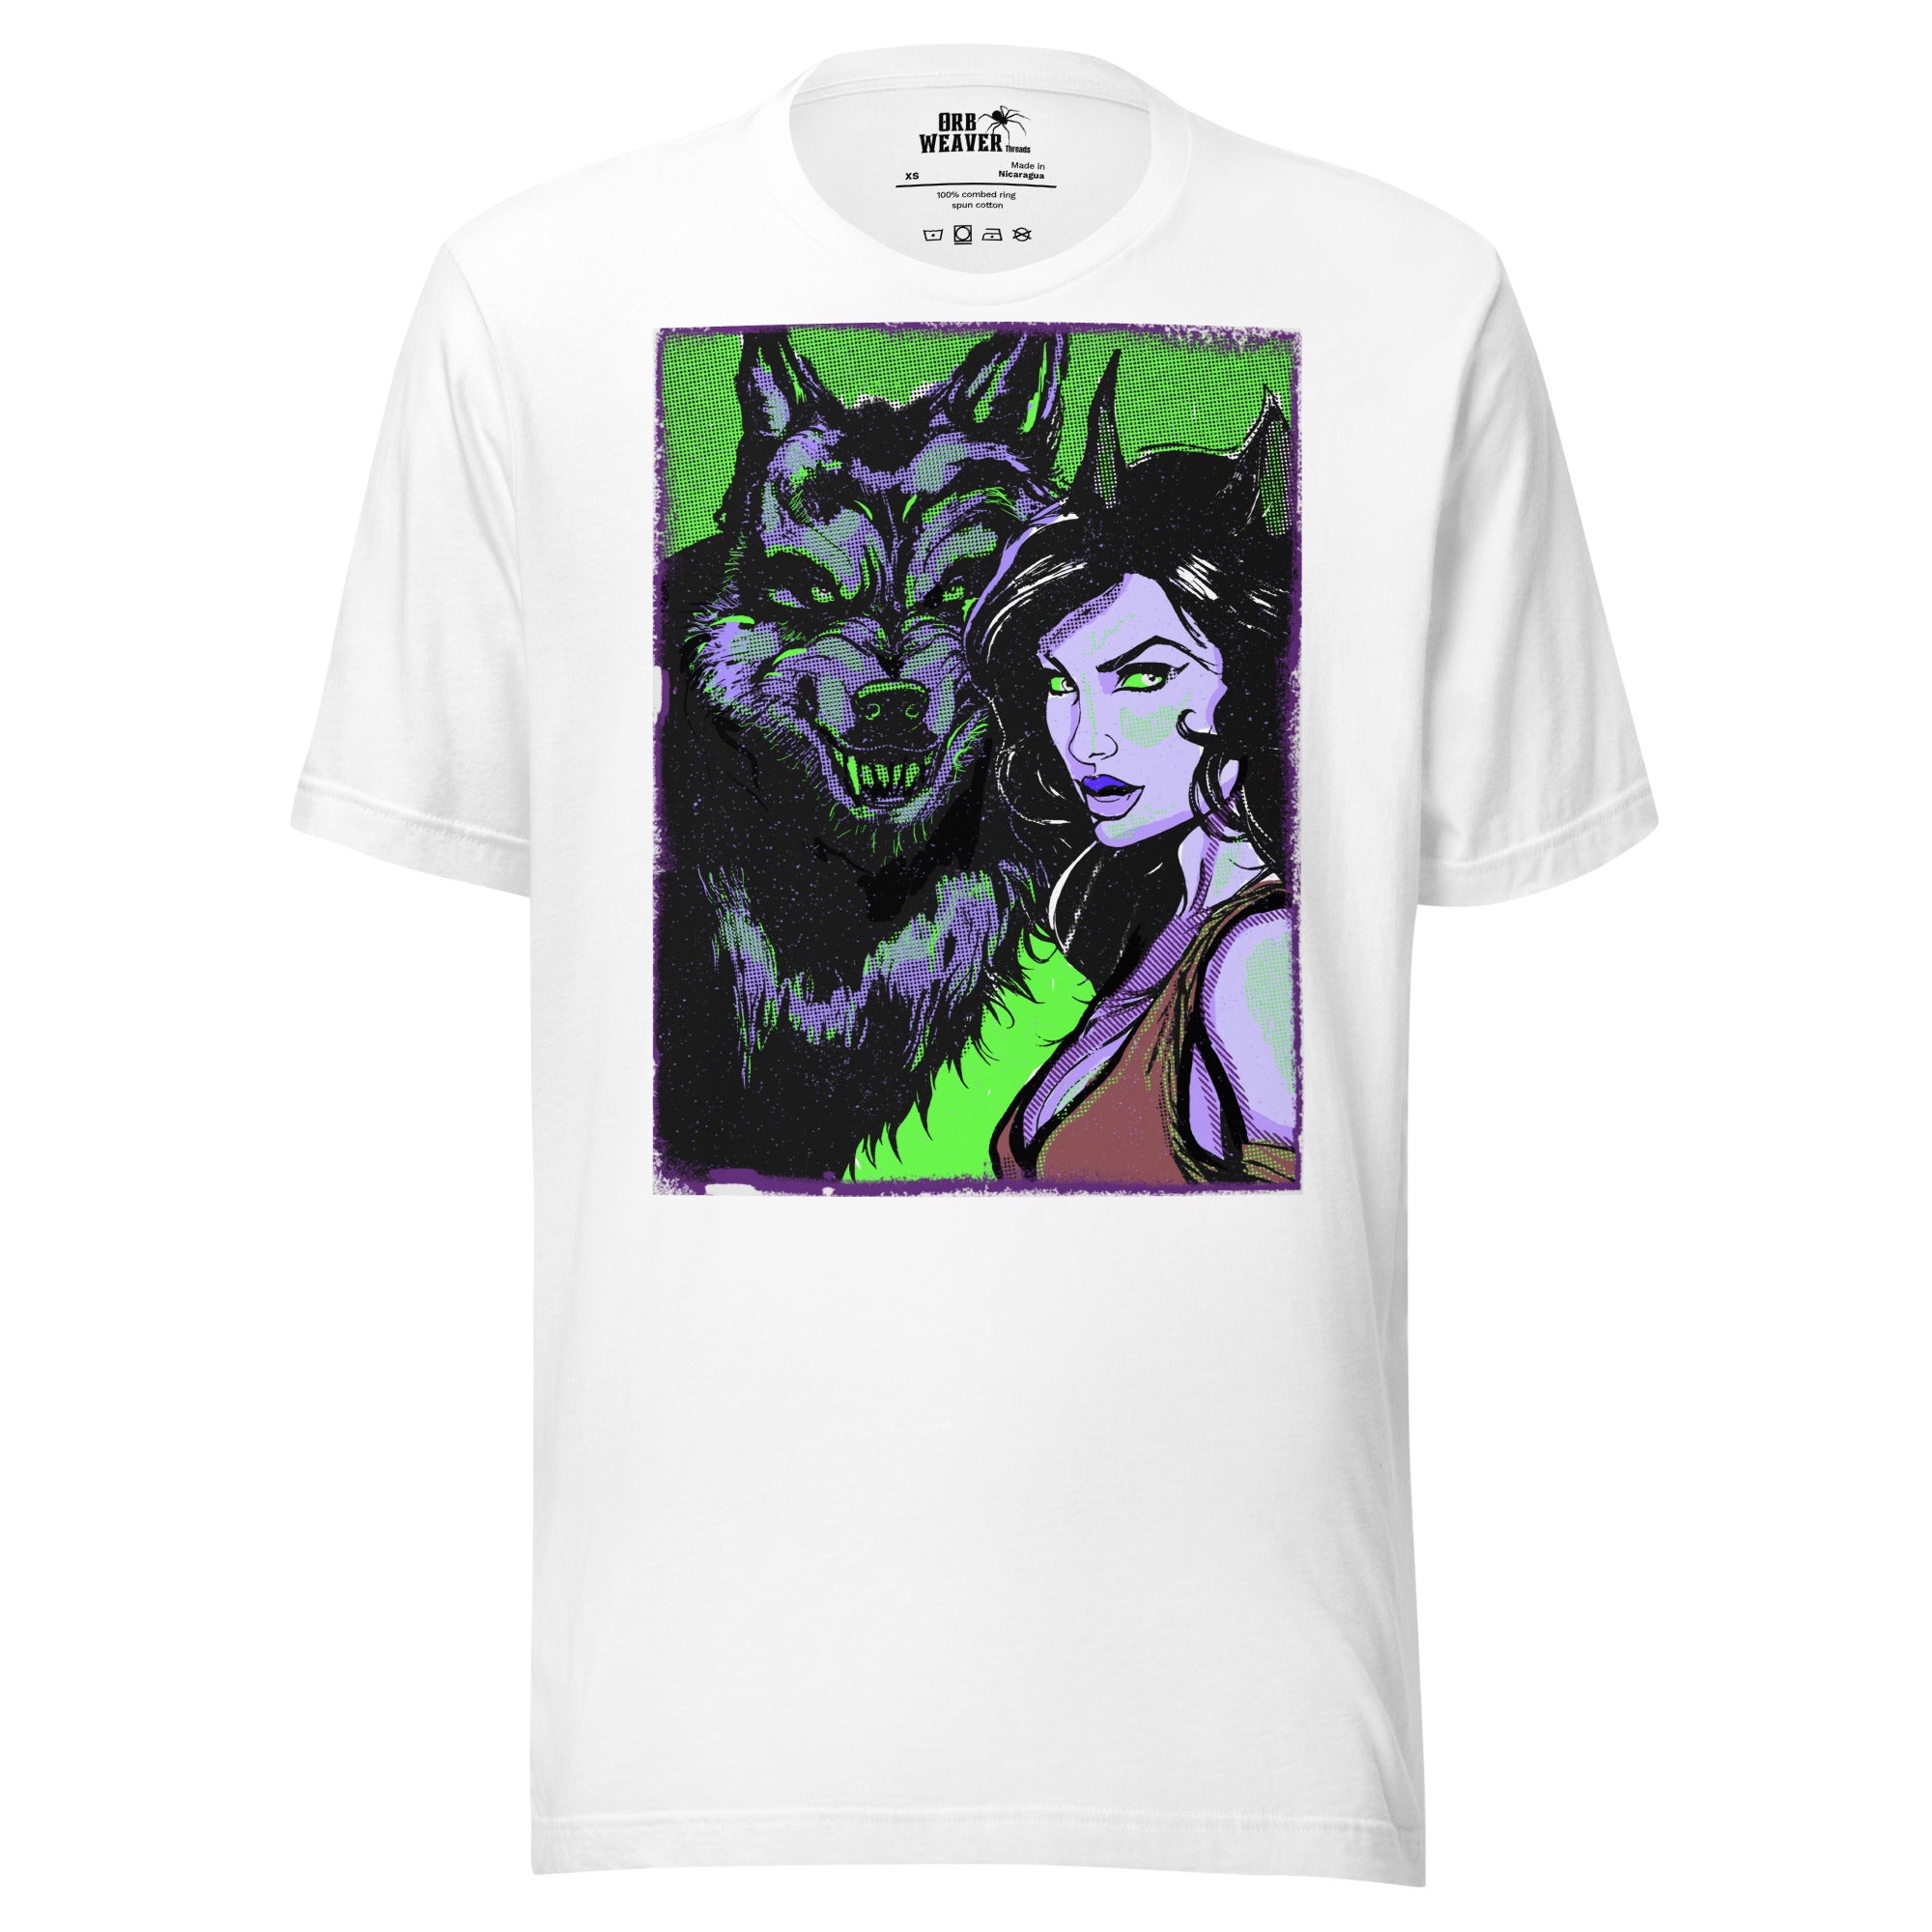 She-Wolf Graphic Tee